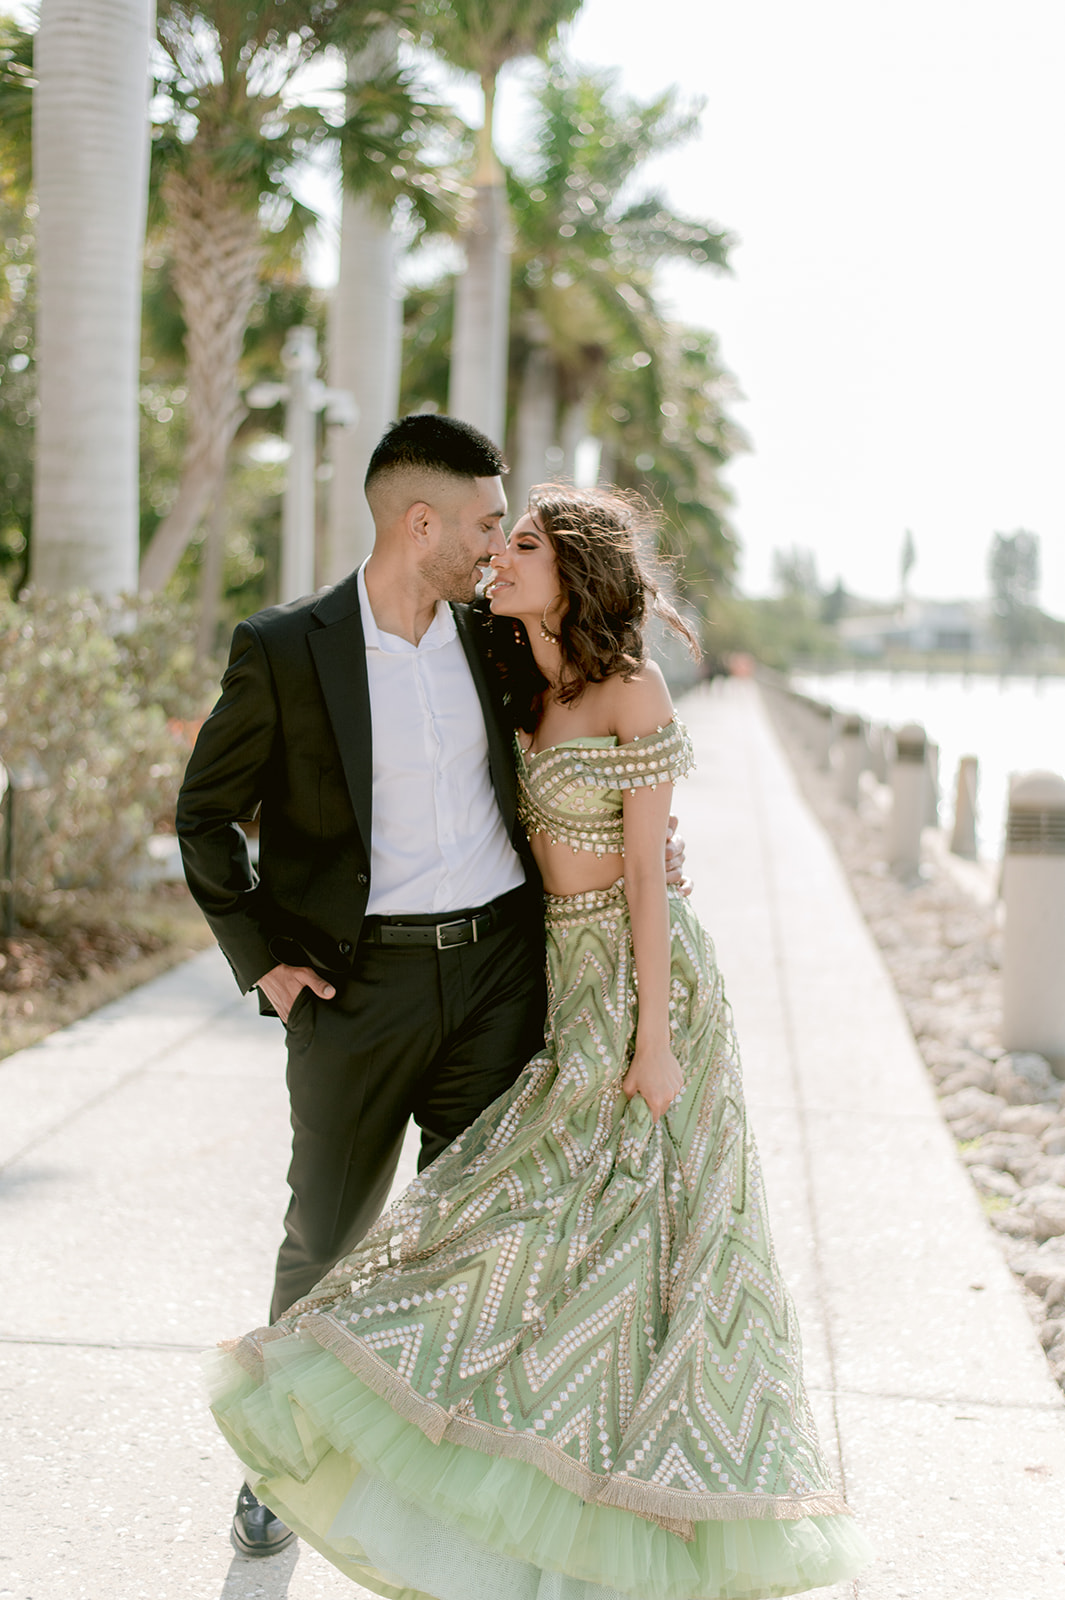 "Ringling Museum engagement shoot with Indian couple captures the beauty of the Ca' d'Zan mansion and love"
